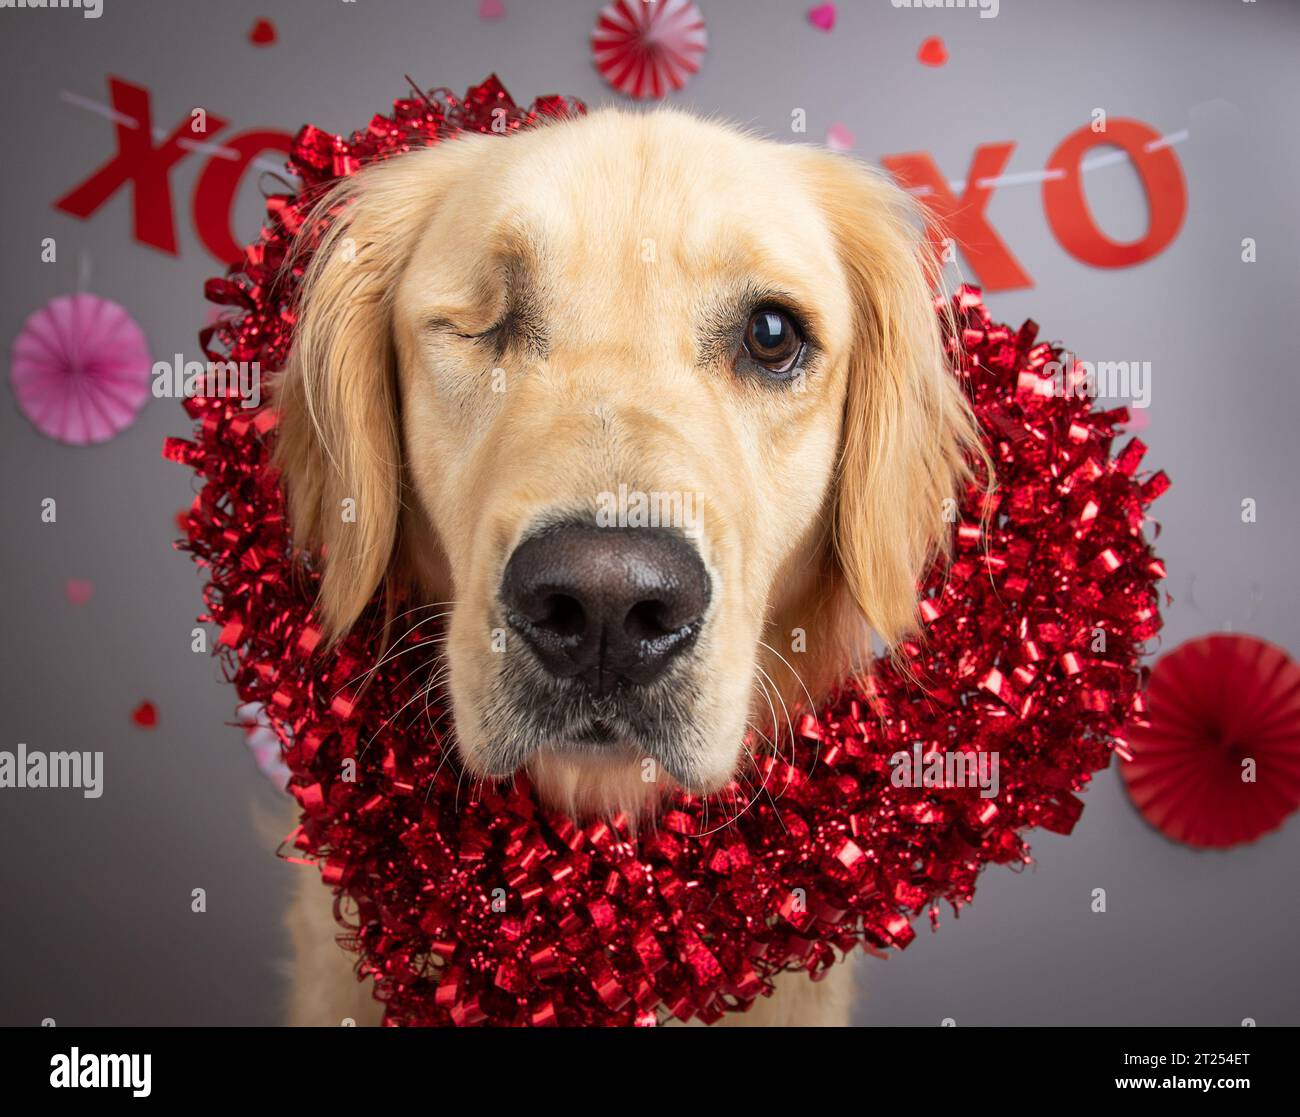 Portrait of a one eyed dog wearing a heart shaped wreath Stock Photo